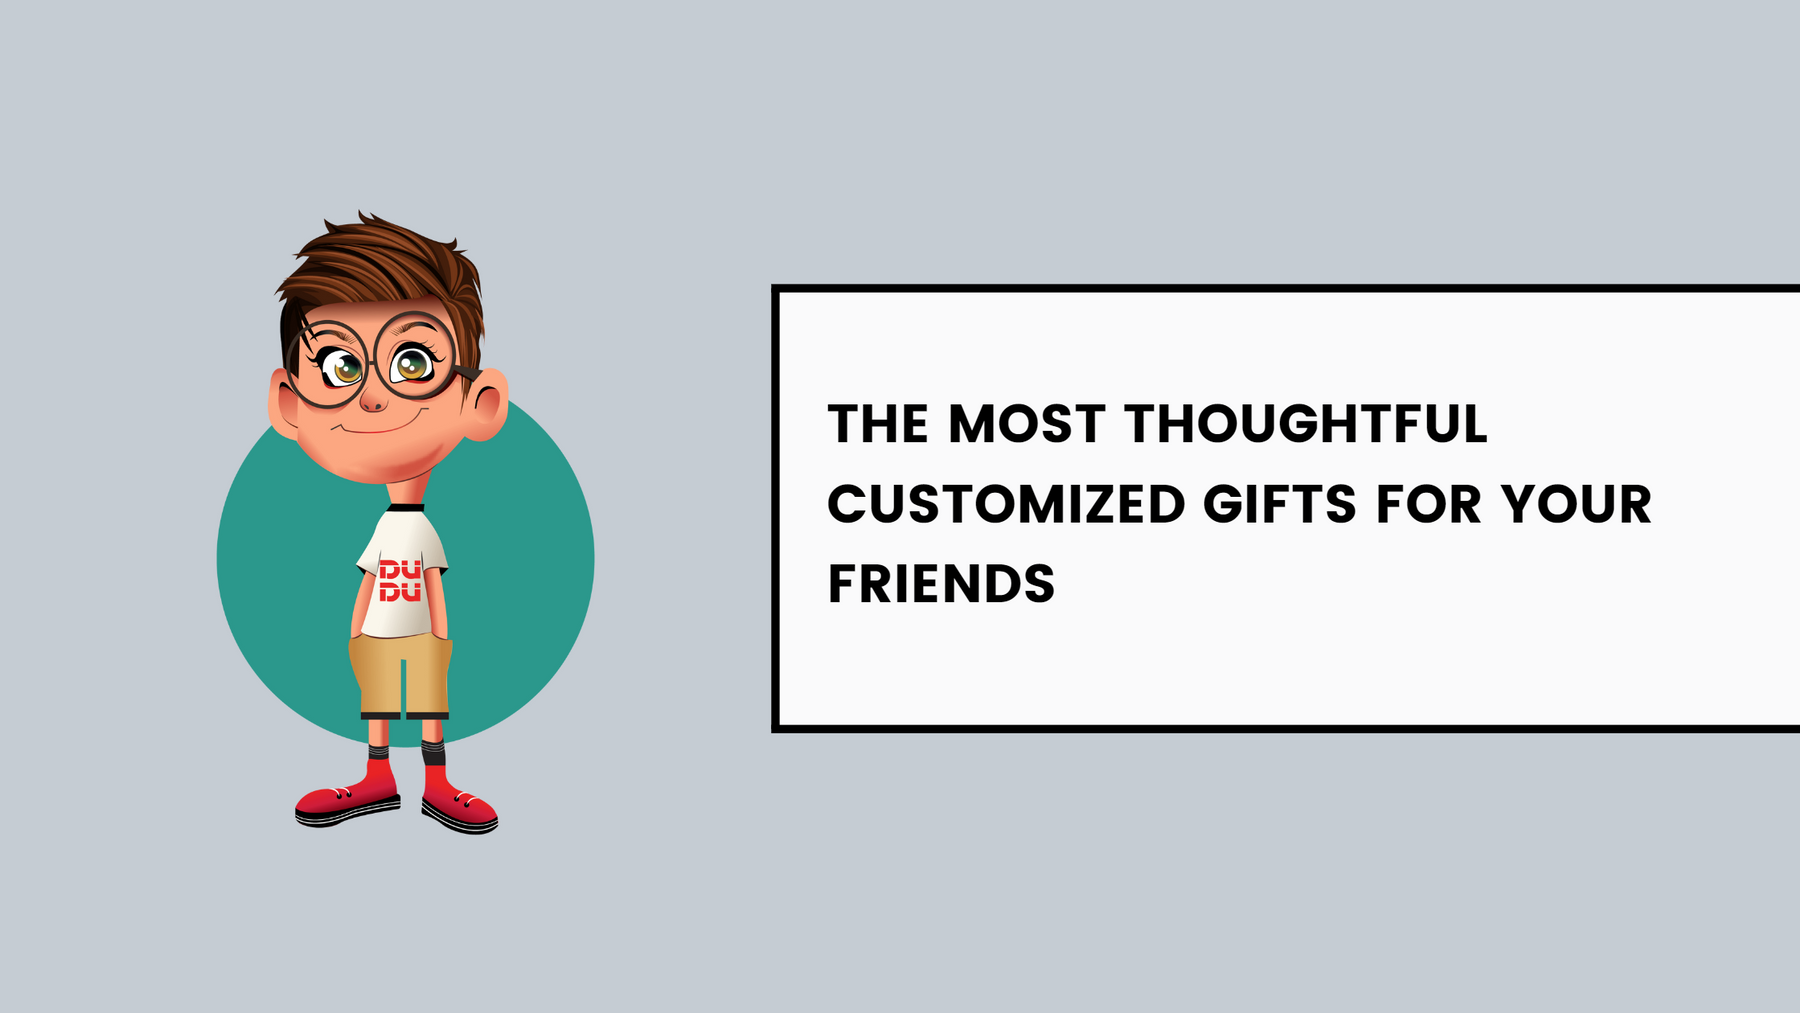 The Most Thoughtful Customized Gifts for Your Friends